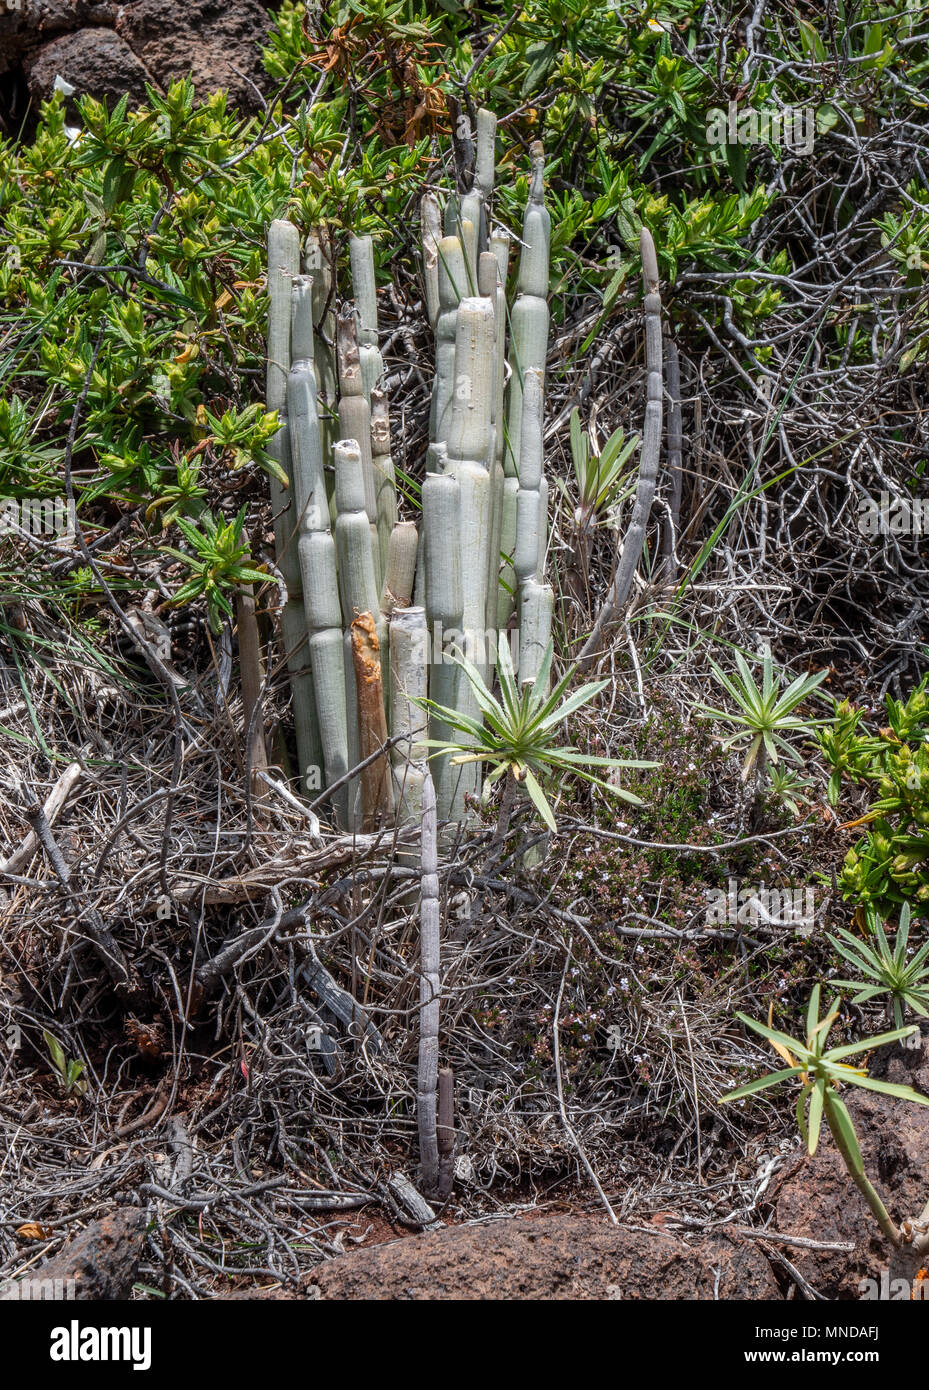 Ceropegia fusca or dichotoma a leafless perennial adapted to hot dry conditions growing above the Barranco de Rincon La Gomera Canary Islands Stock Photo